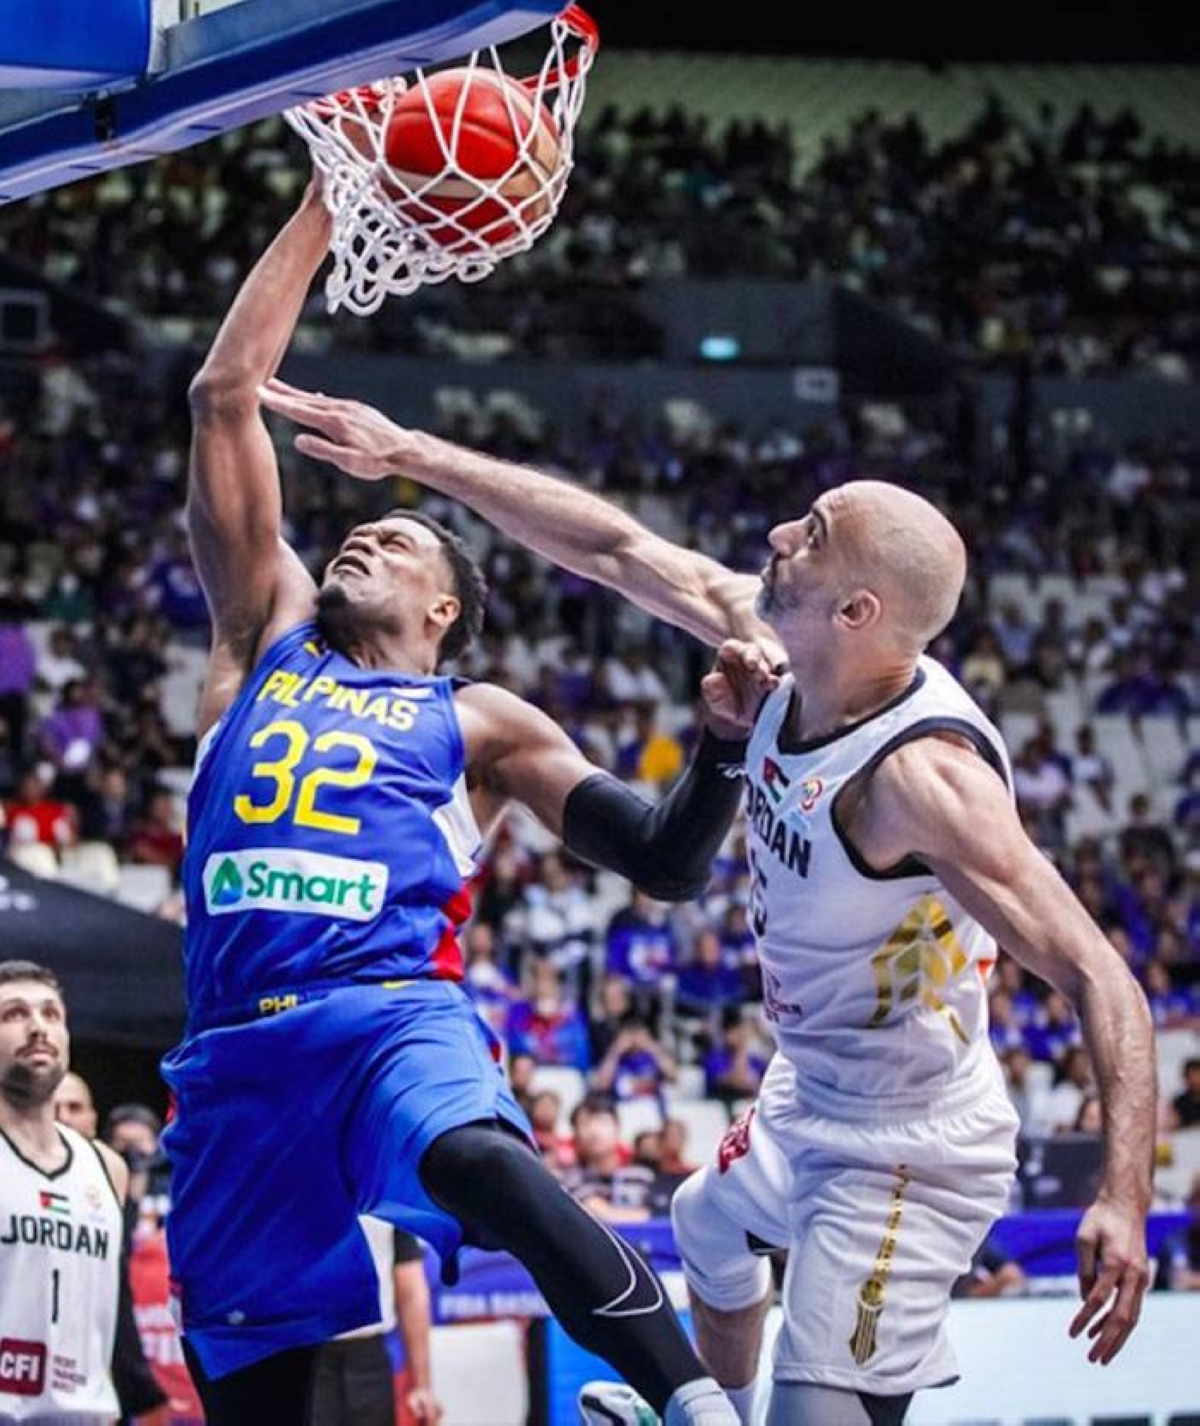 Naturalized player Justin Brownlee dunks against a Jordanian player during the FIBA World Cup Asian Qualifiers held at the Philippine Arena in February. FIBA PHOTO